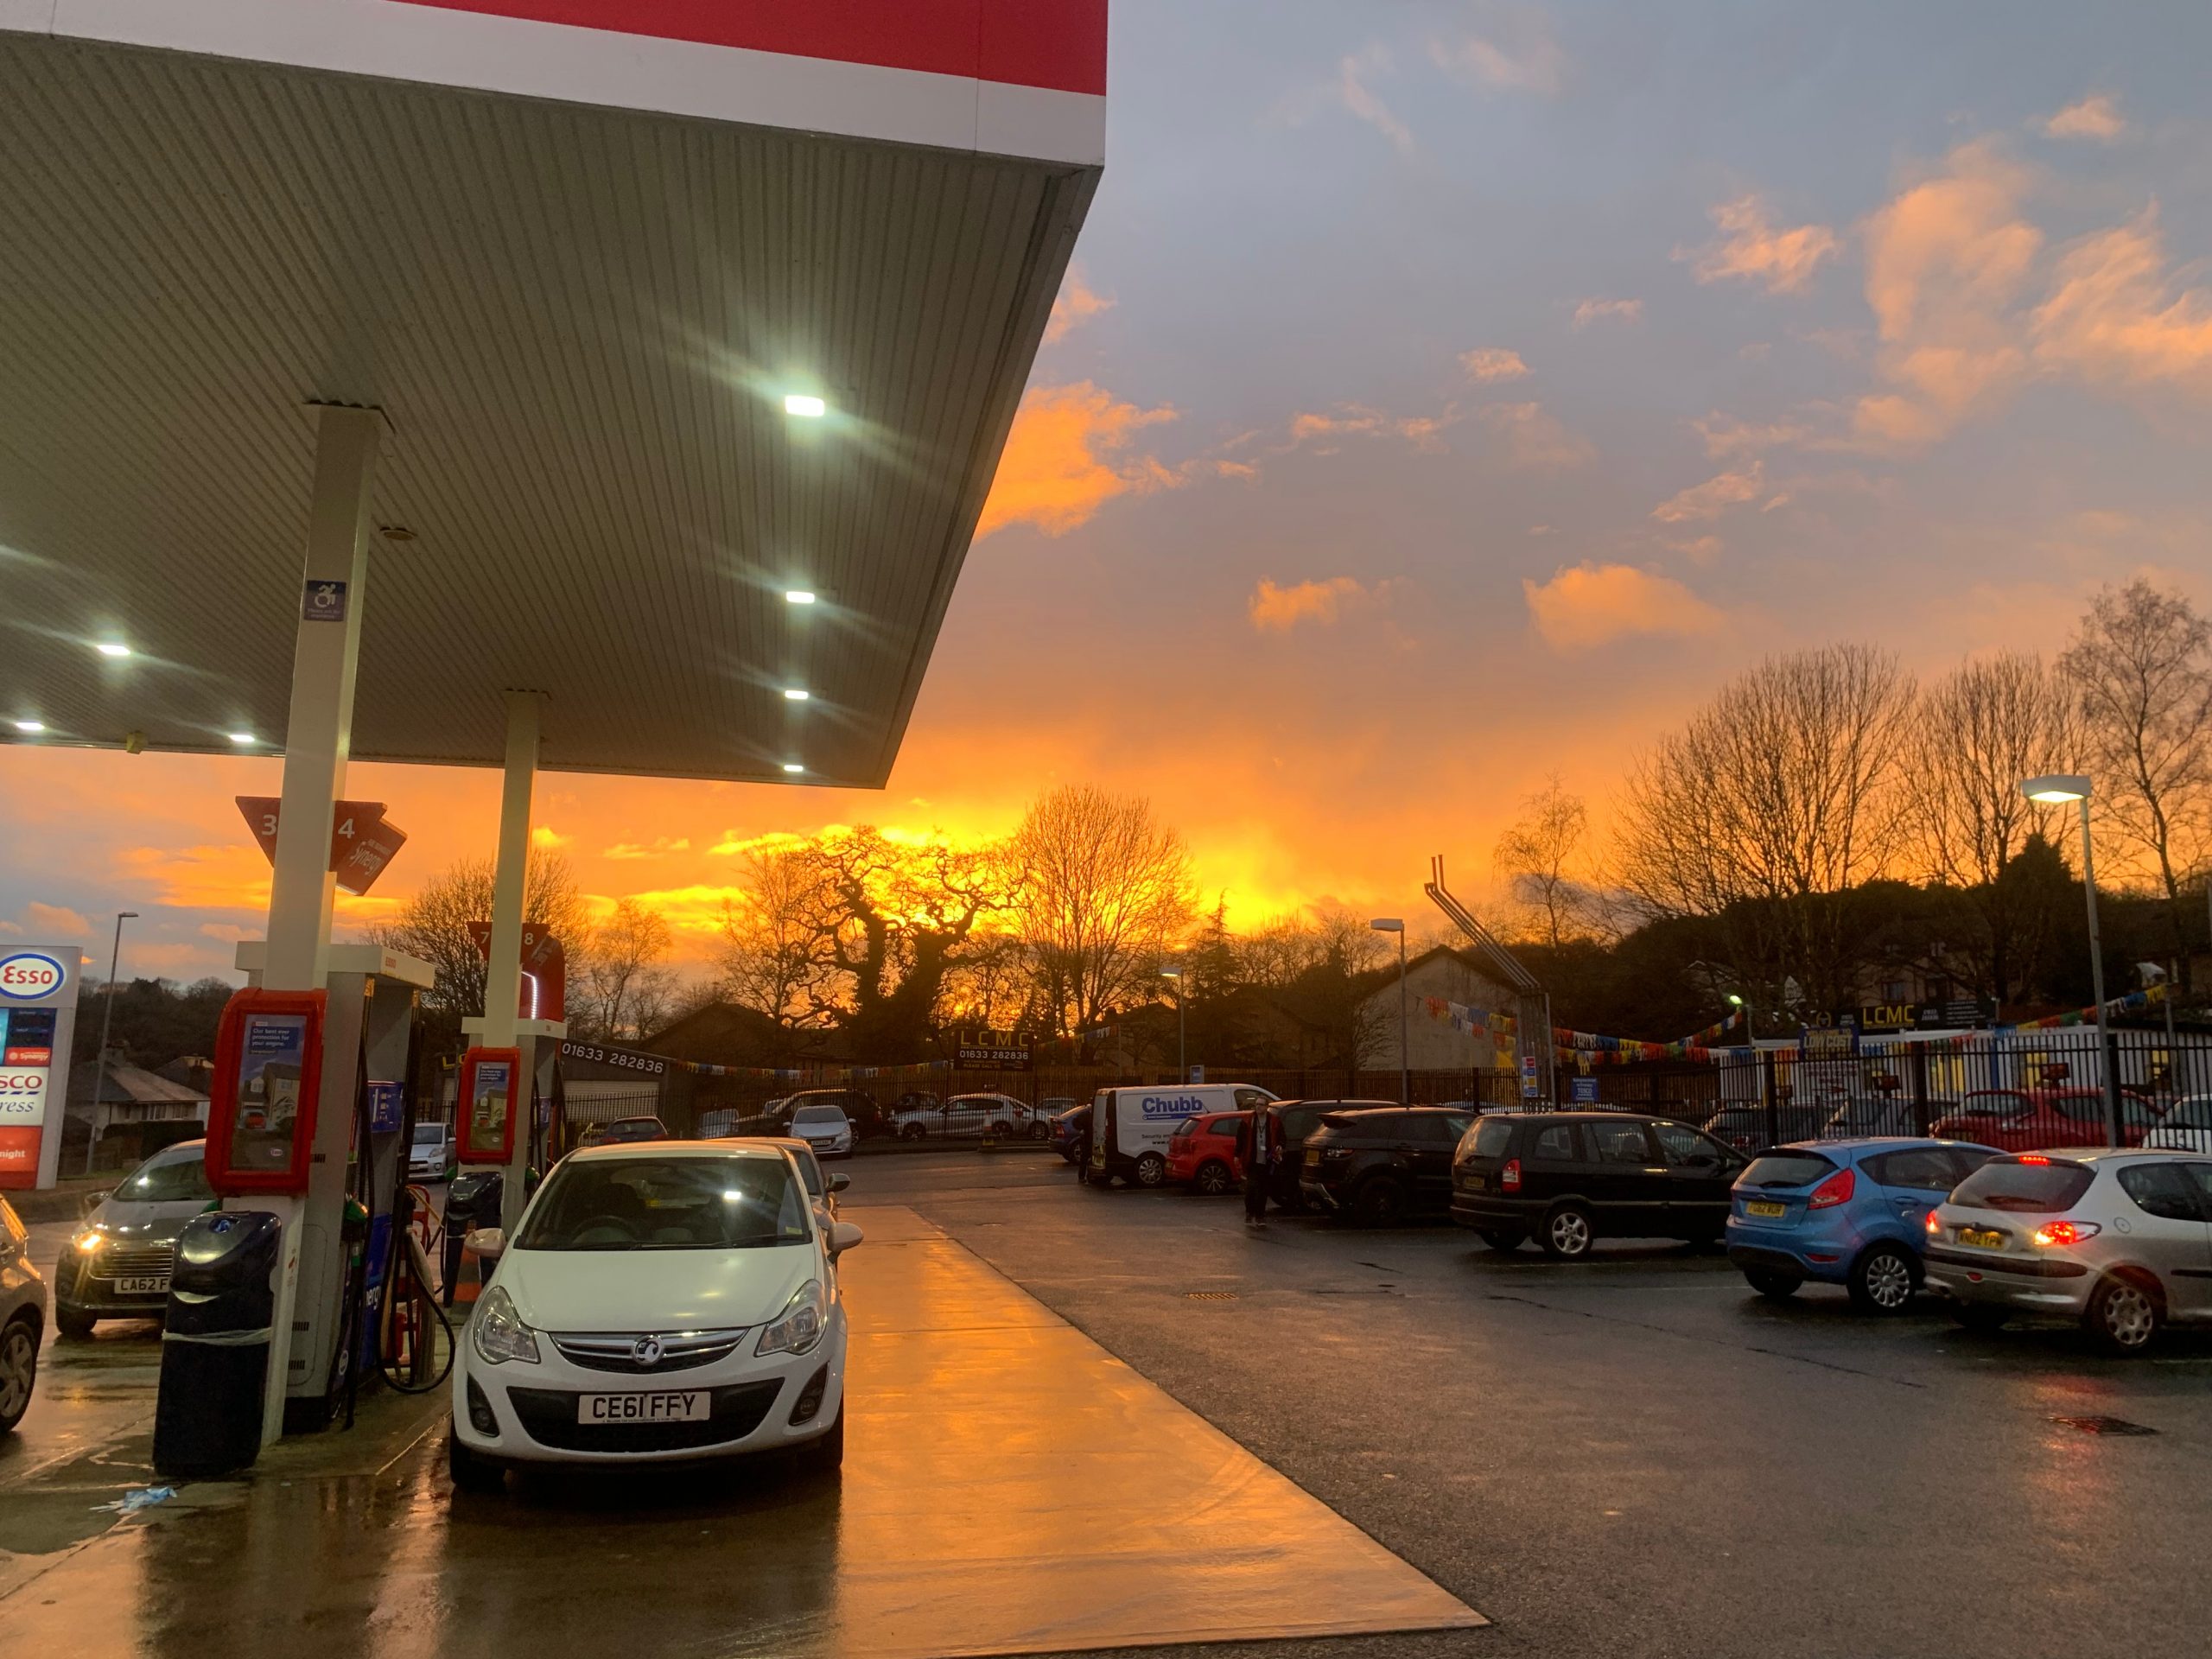 Signs that fuel sales on rise again in GB – Irish prices back to pre-pandemic levels, says AA